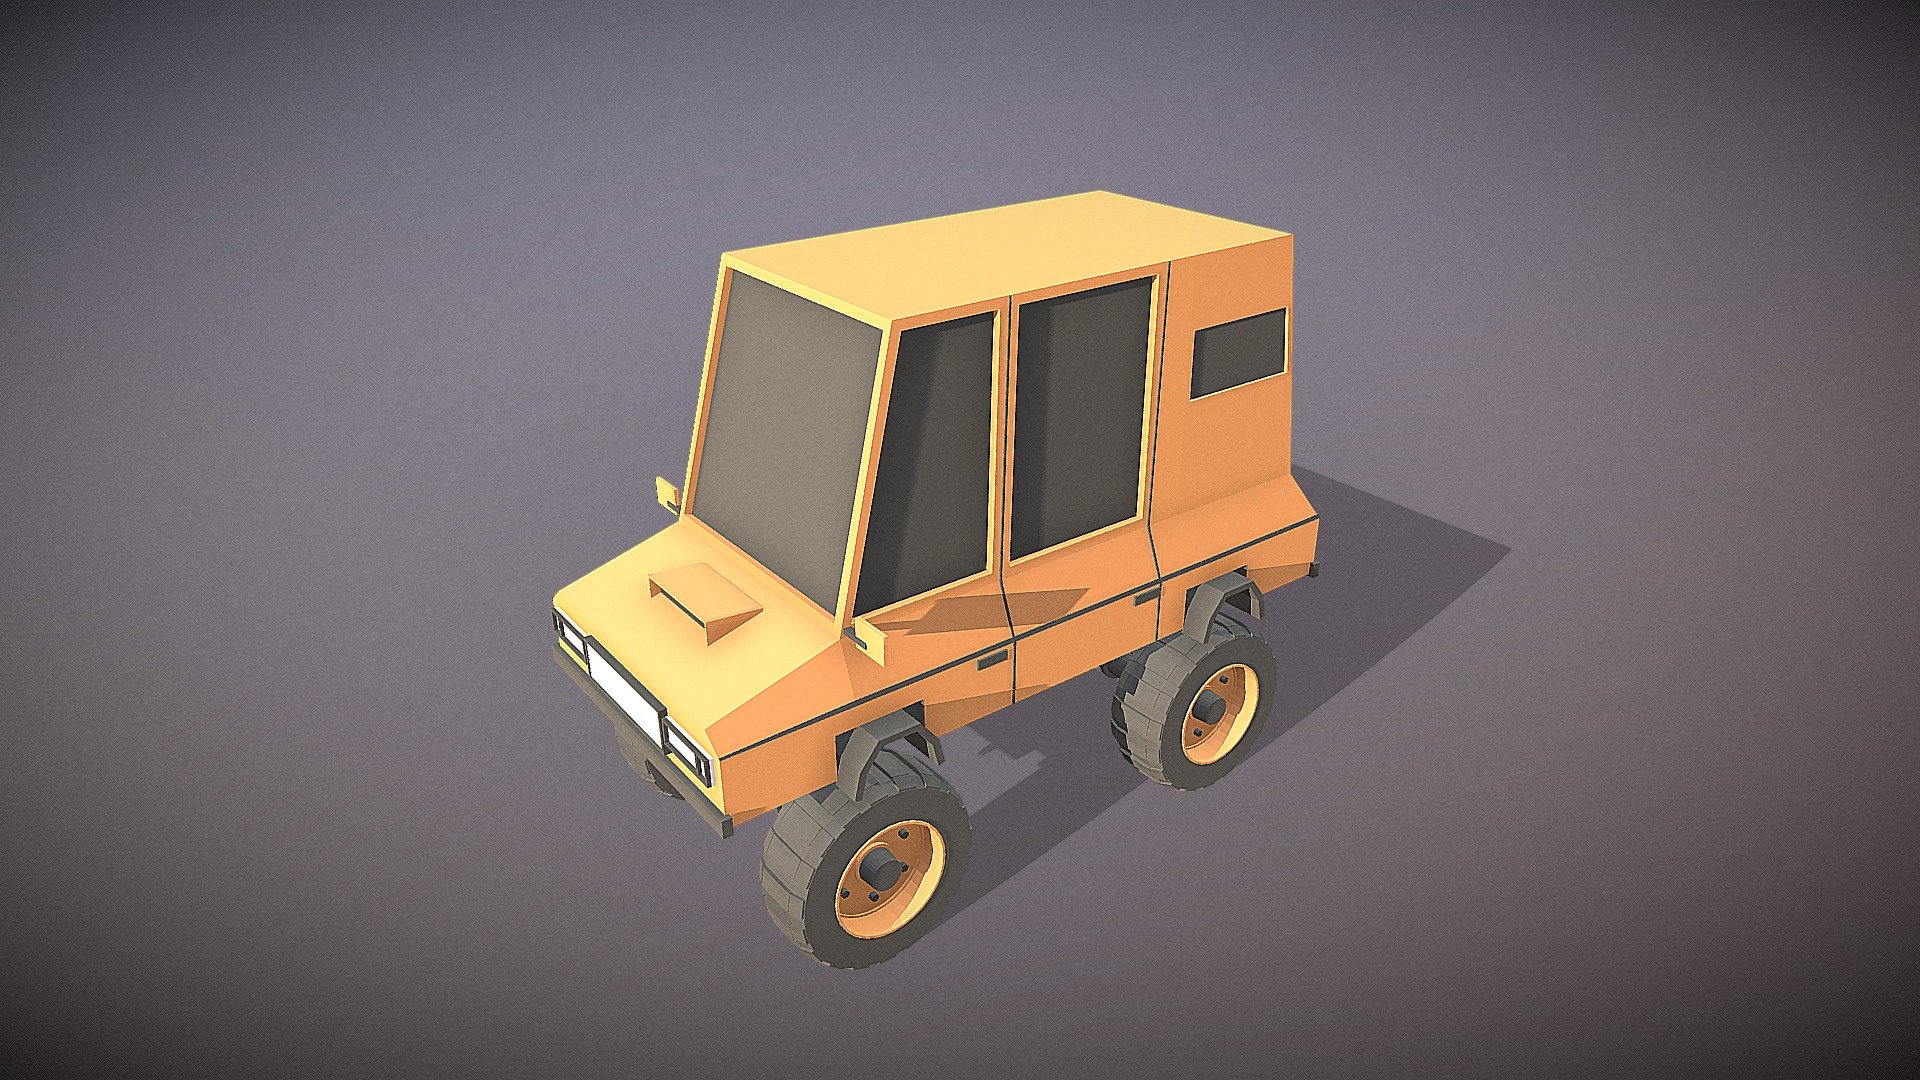 Low poly car blander and unity
Distinctive and unique design 
Share your opinion with us if you like it
Encourage us to publish more in the future - Car Low Poly - Download Free 3D model by A_Aalah (@abdosalah513) 3d model